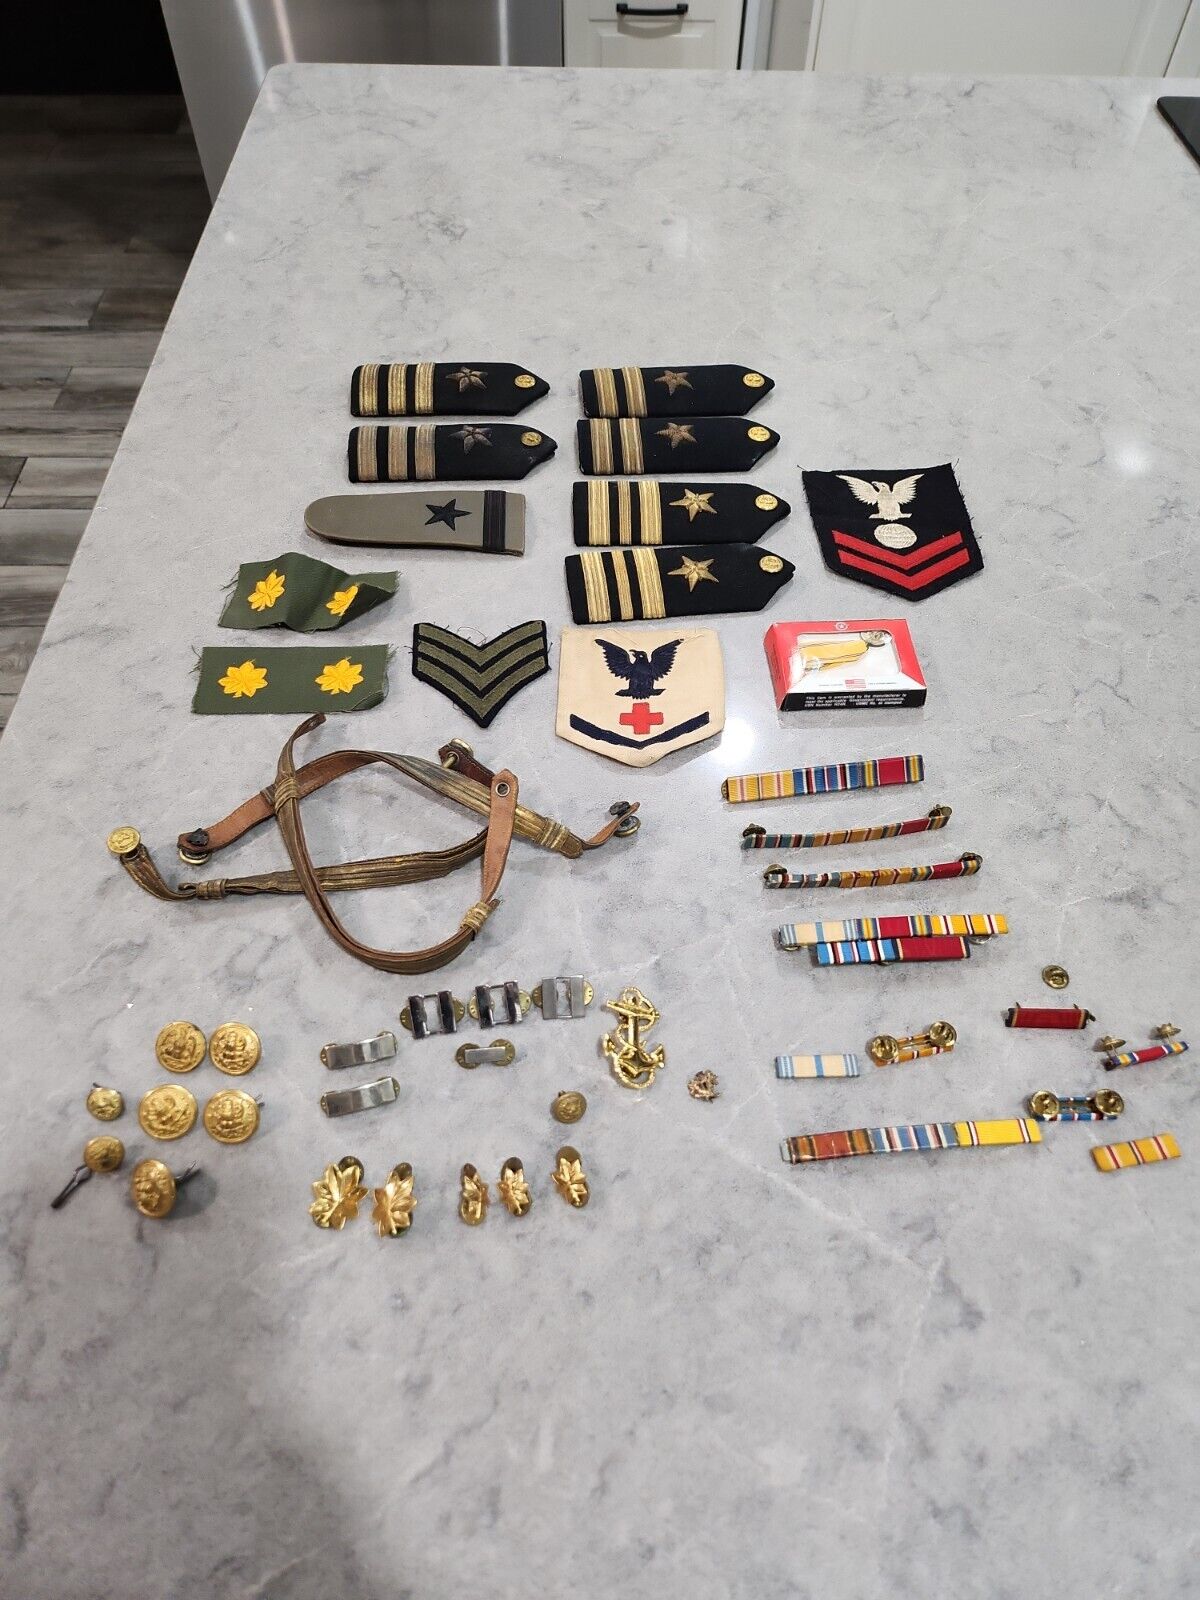 Vintage Grouping of Military Navy Medals Bars Pins Buttons Rank Insignia